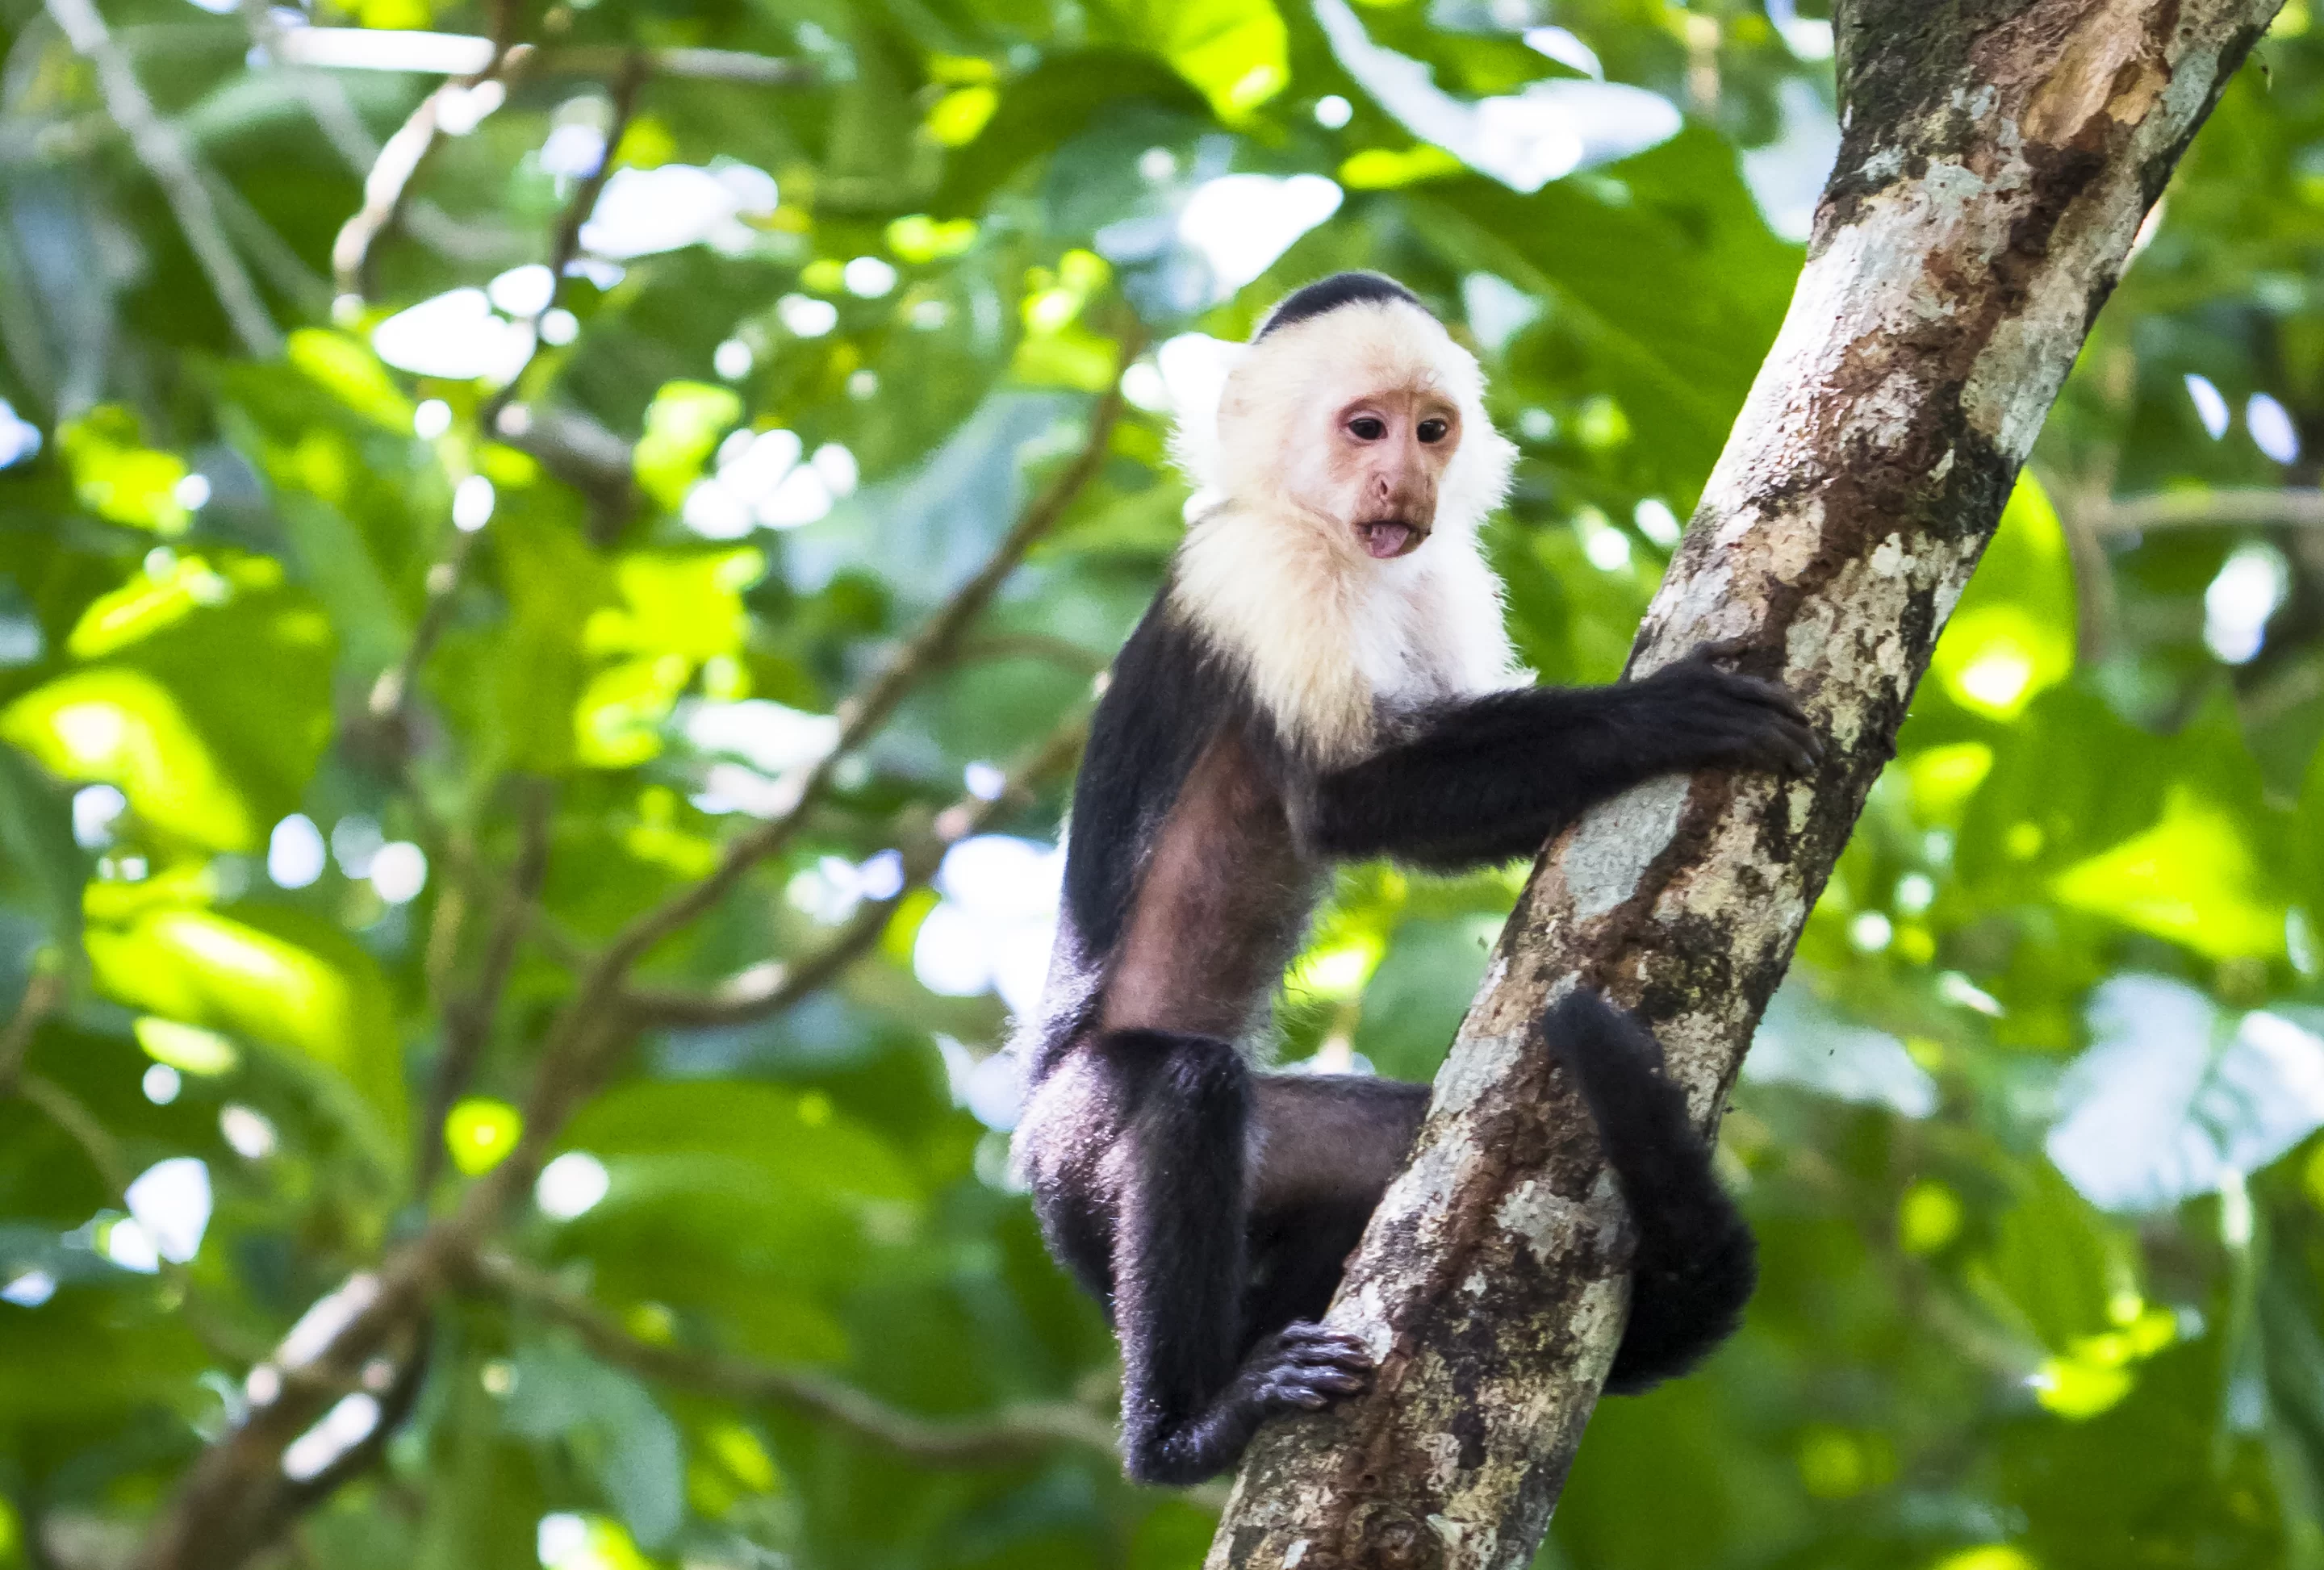 Catch a glimpse of white-faced capuchins swinging through the branches and discover exotic orchids.